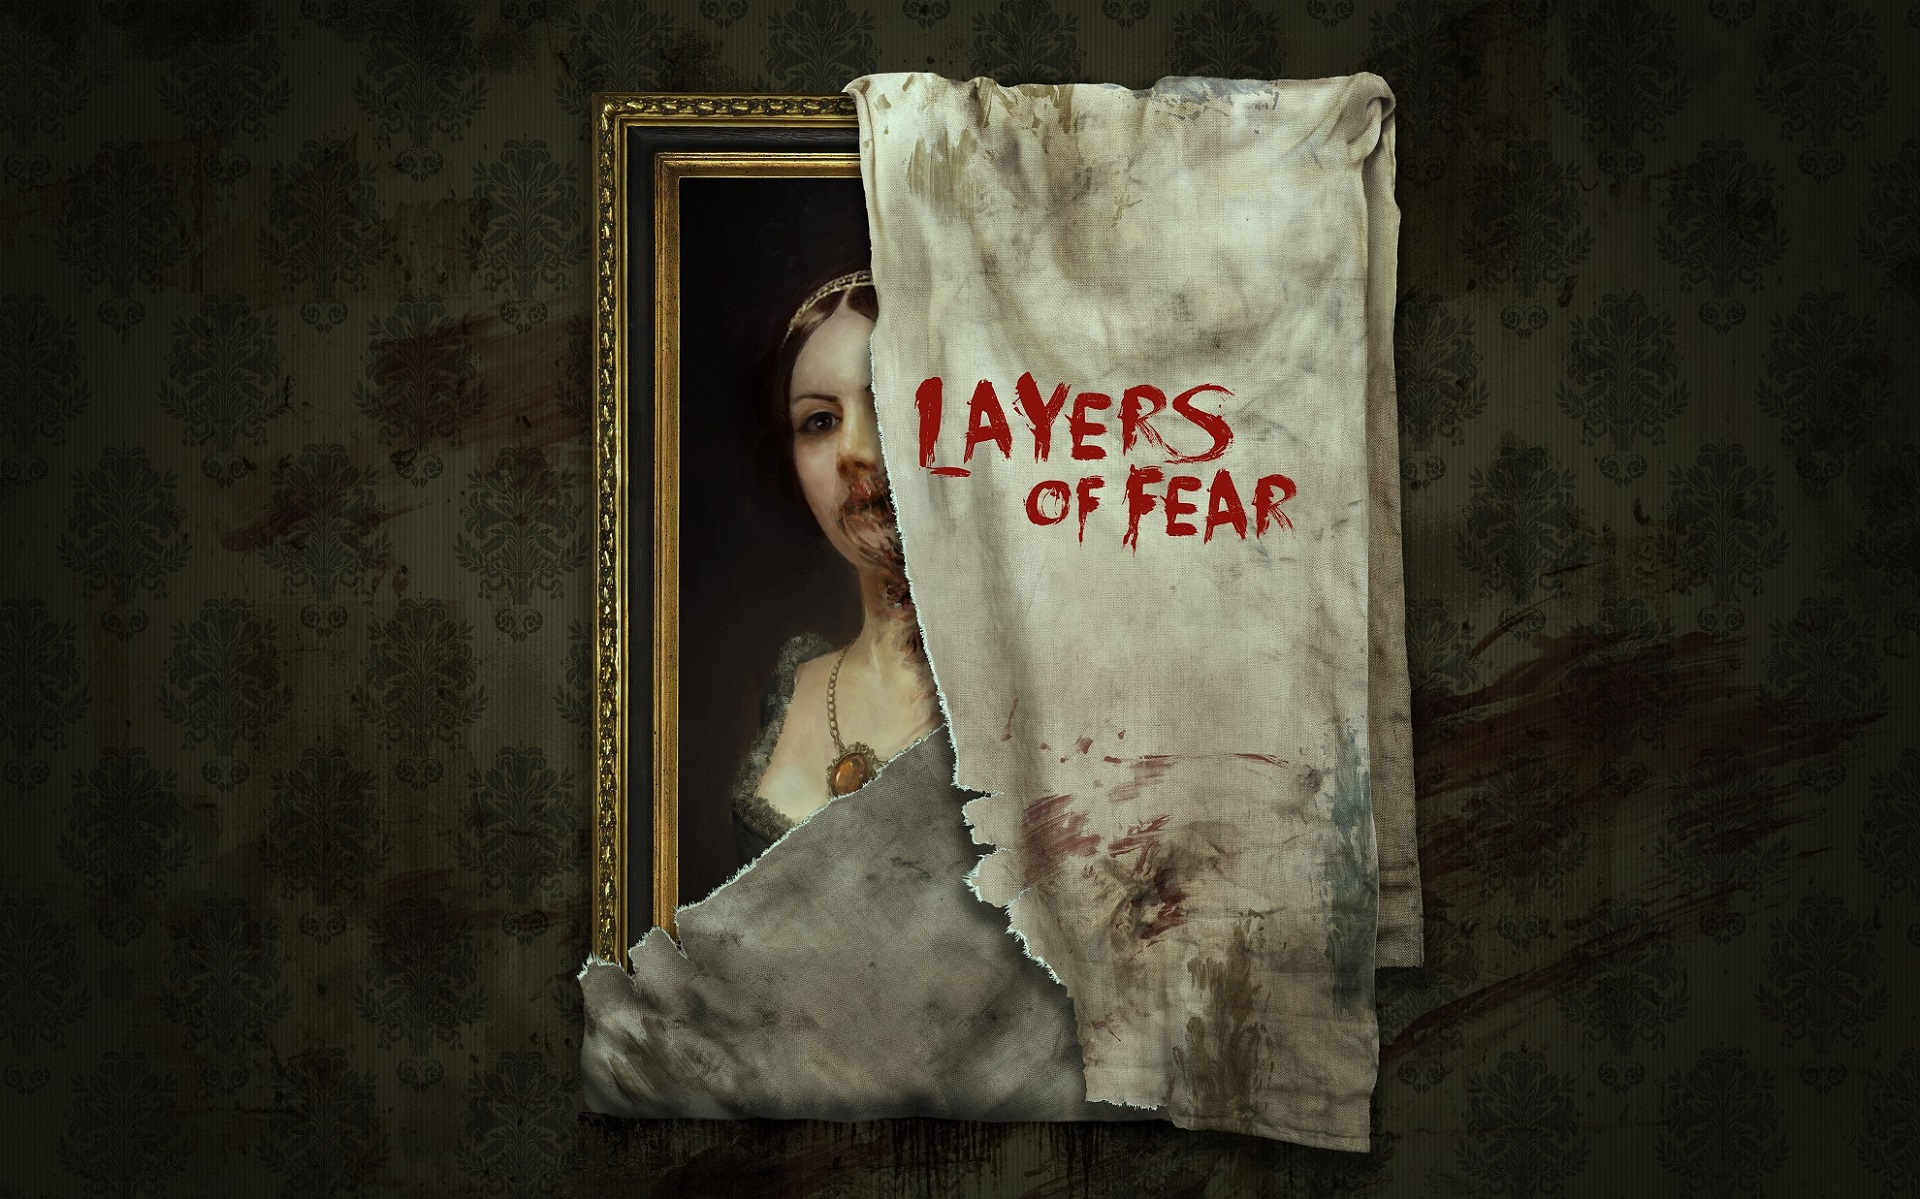 https://presskit.blooberteam.com/layers_of_fear/images/layers_of_fear.png